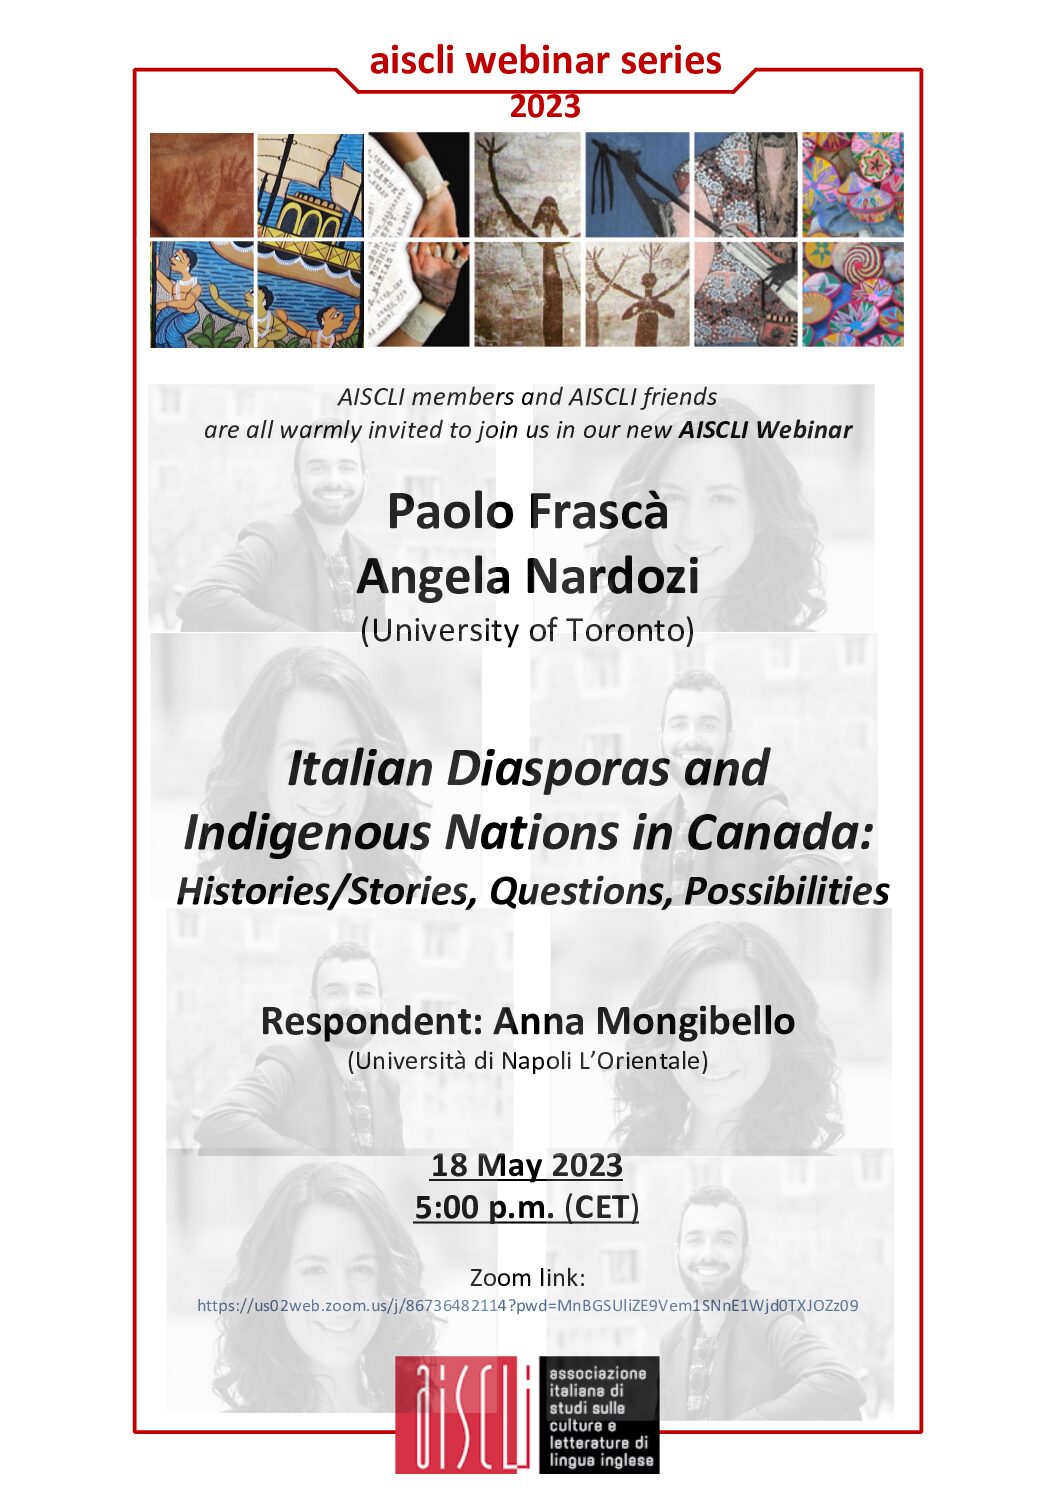 AISCLI WEBINAR SERIES 2023: Italian Diasporas and Indigenous Nations in Canada. With Paolo Frascà and Angela Nardozi